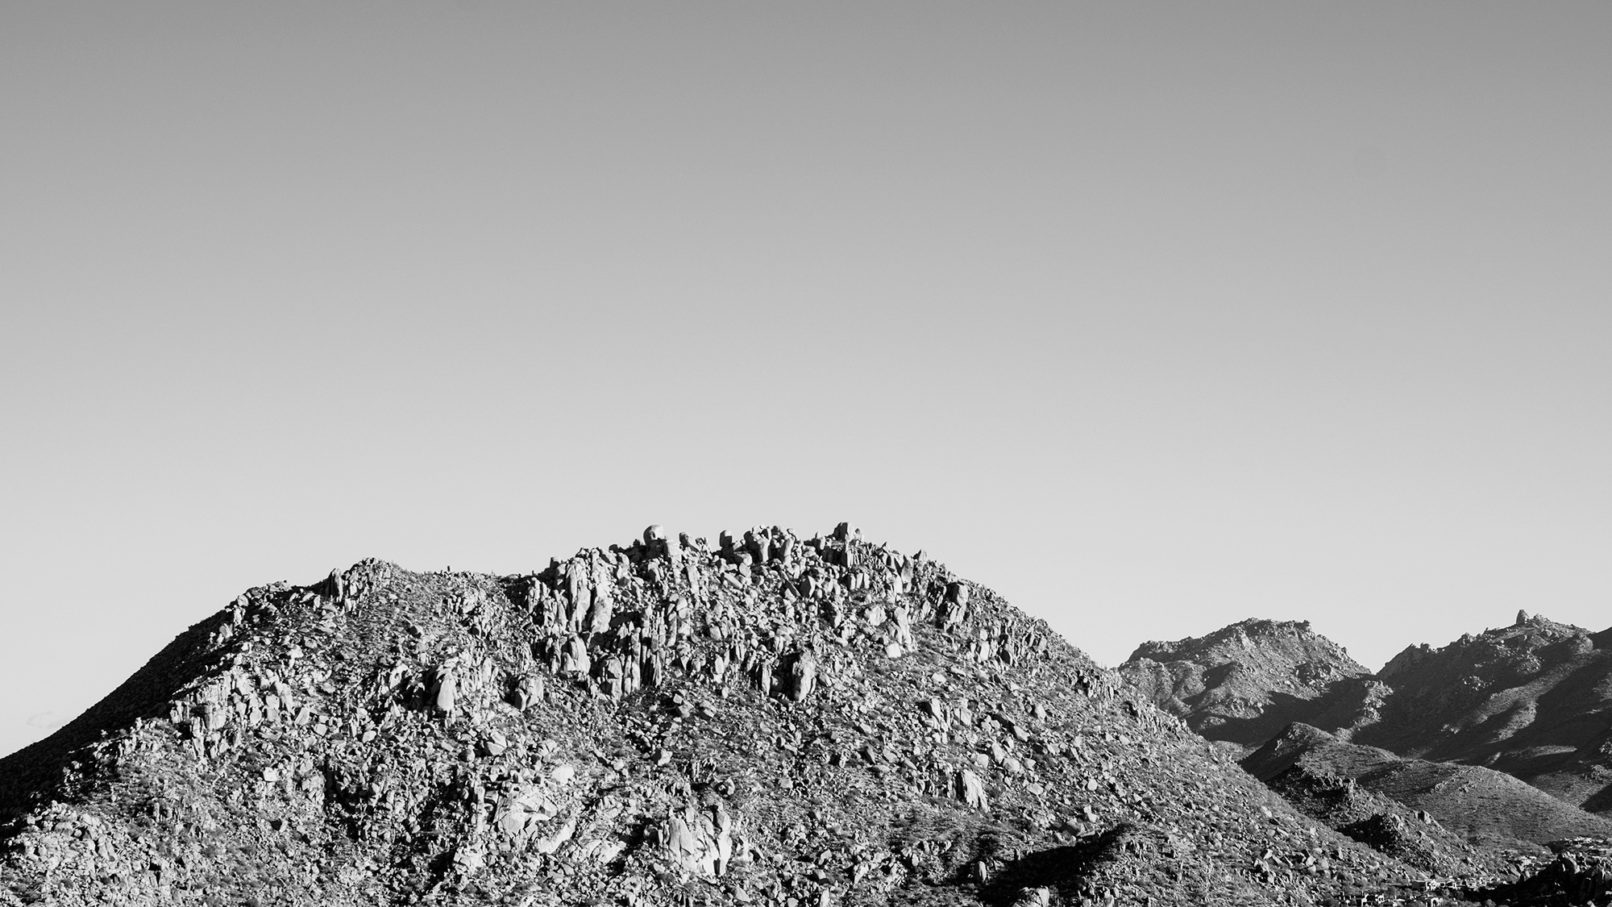 A black and white image of foothills blemished by boulders.